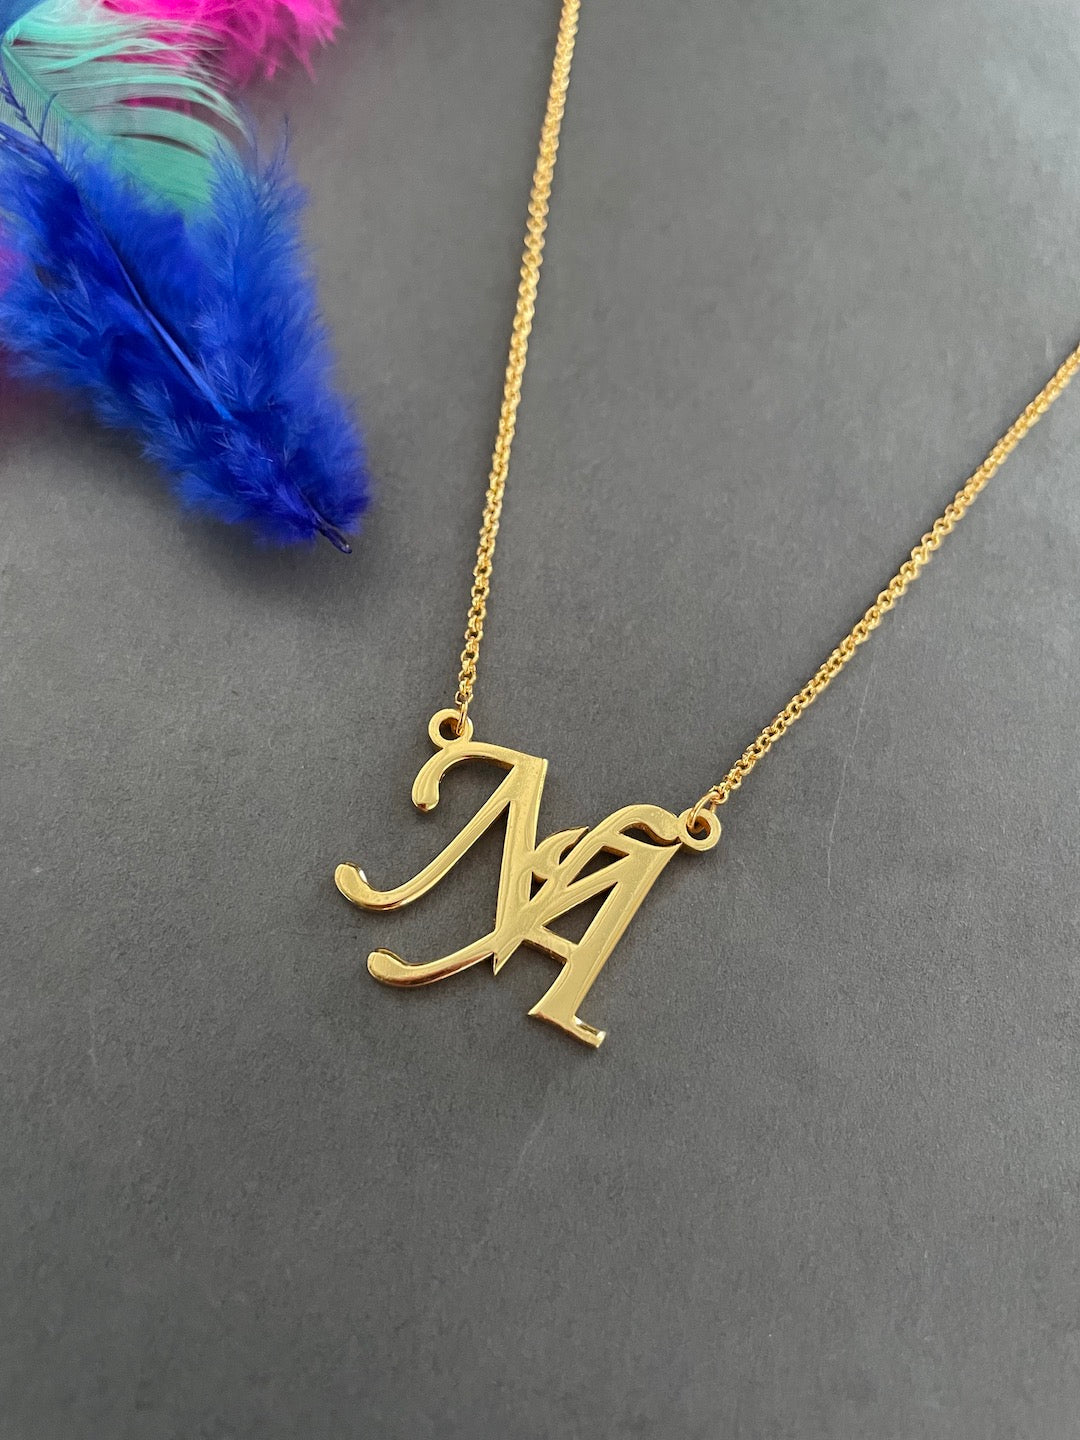 Classic Monogram Necklace With Intertwined Personalised Initials Of 2 Letters